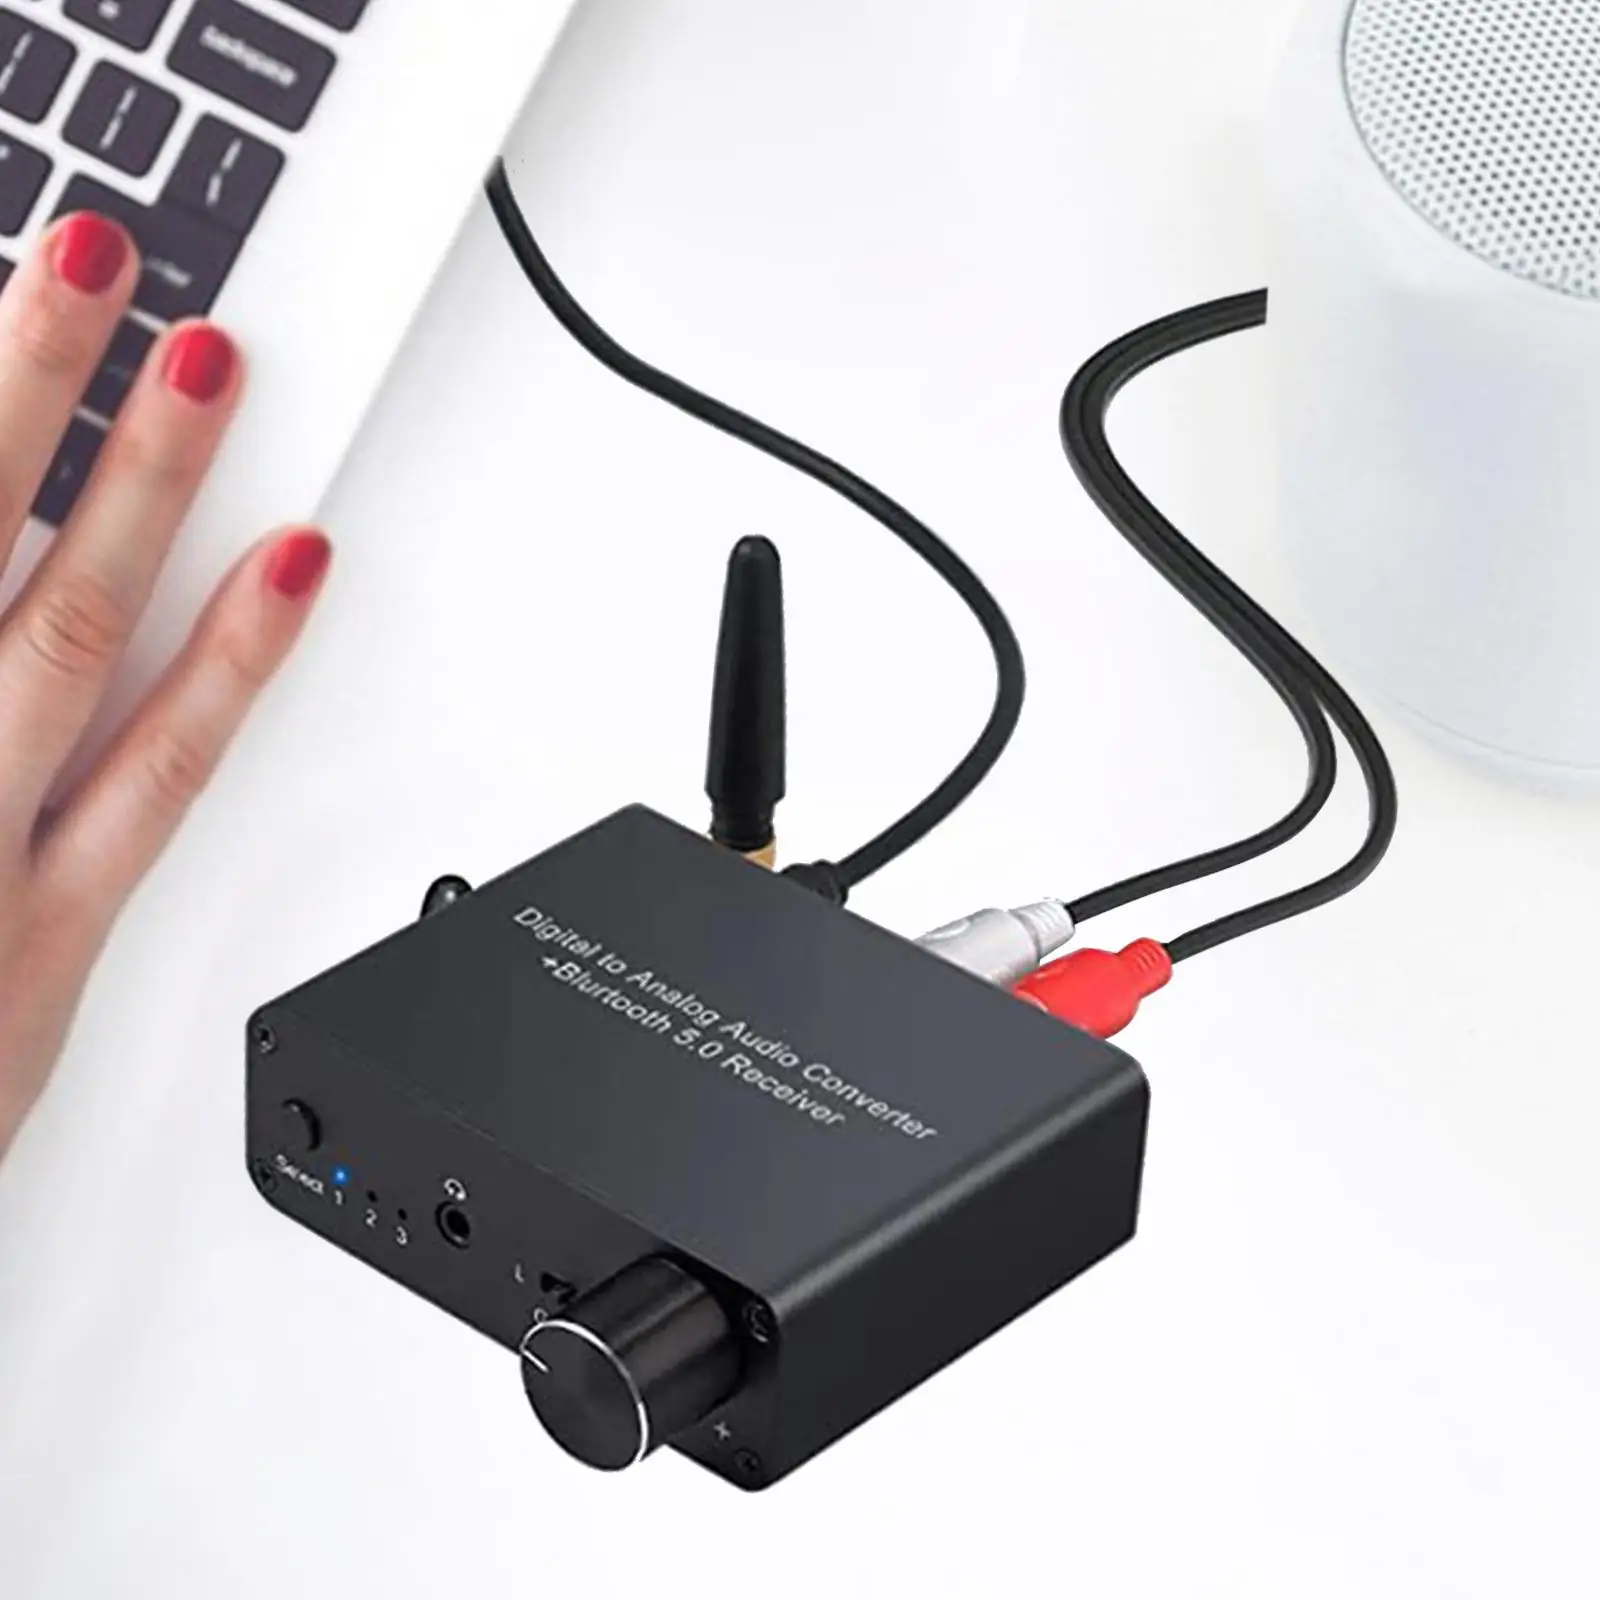 Digital to Analog Audio Converter Bluetooth 5.0 Receiver Low Latency with Volume Control DAC Converter Digital to Analog for TV